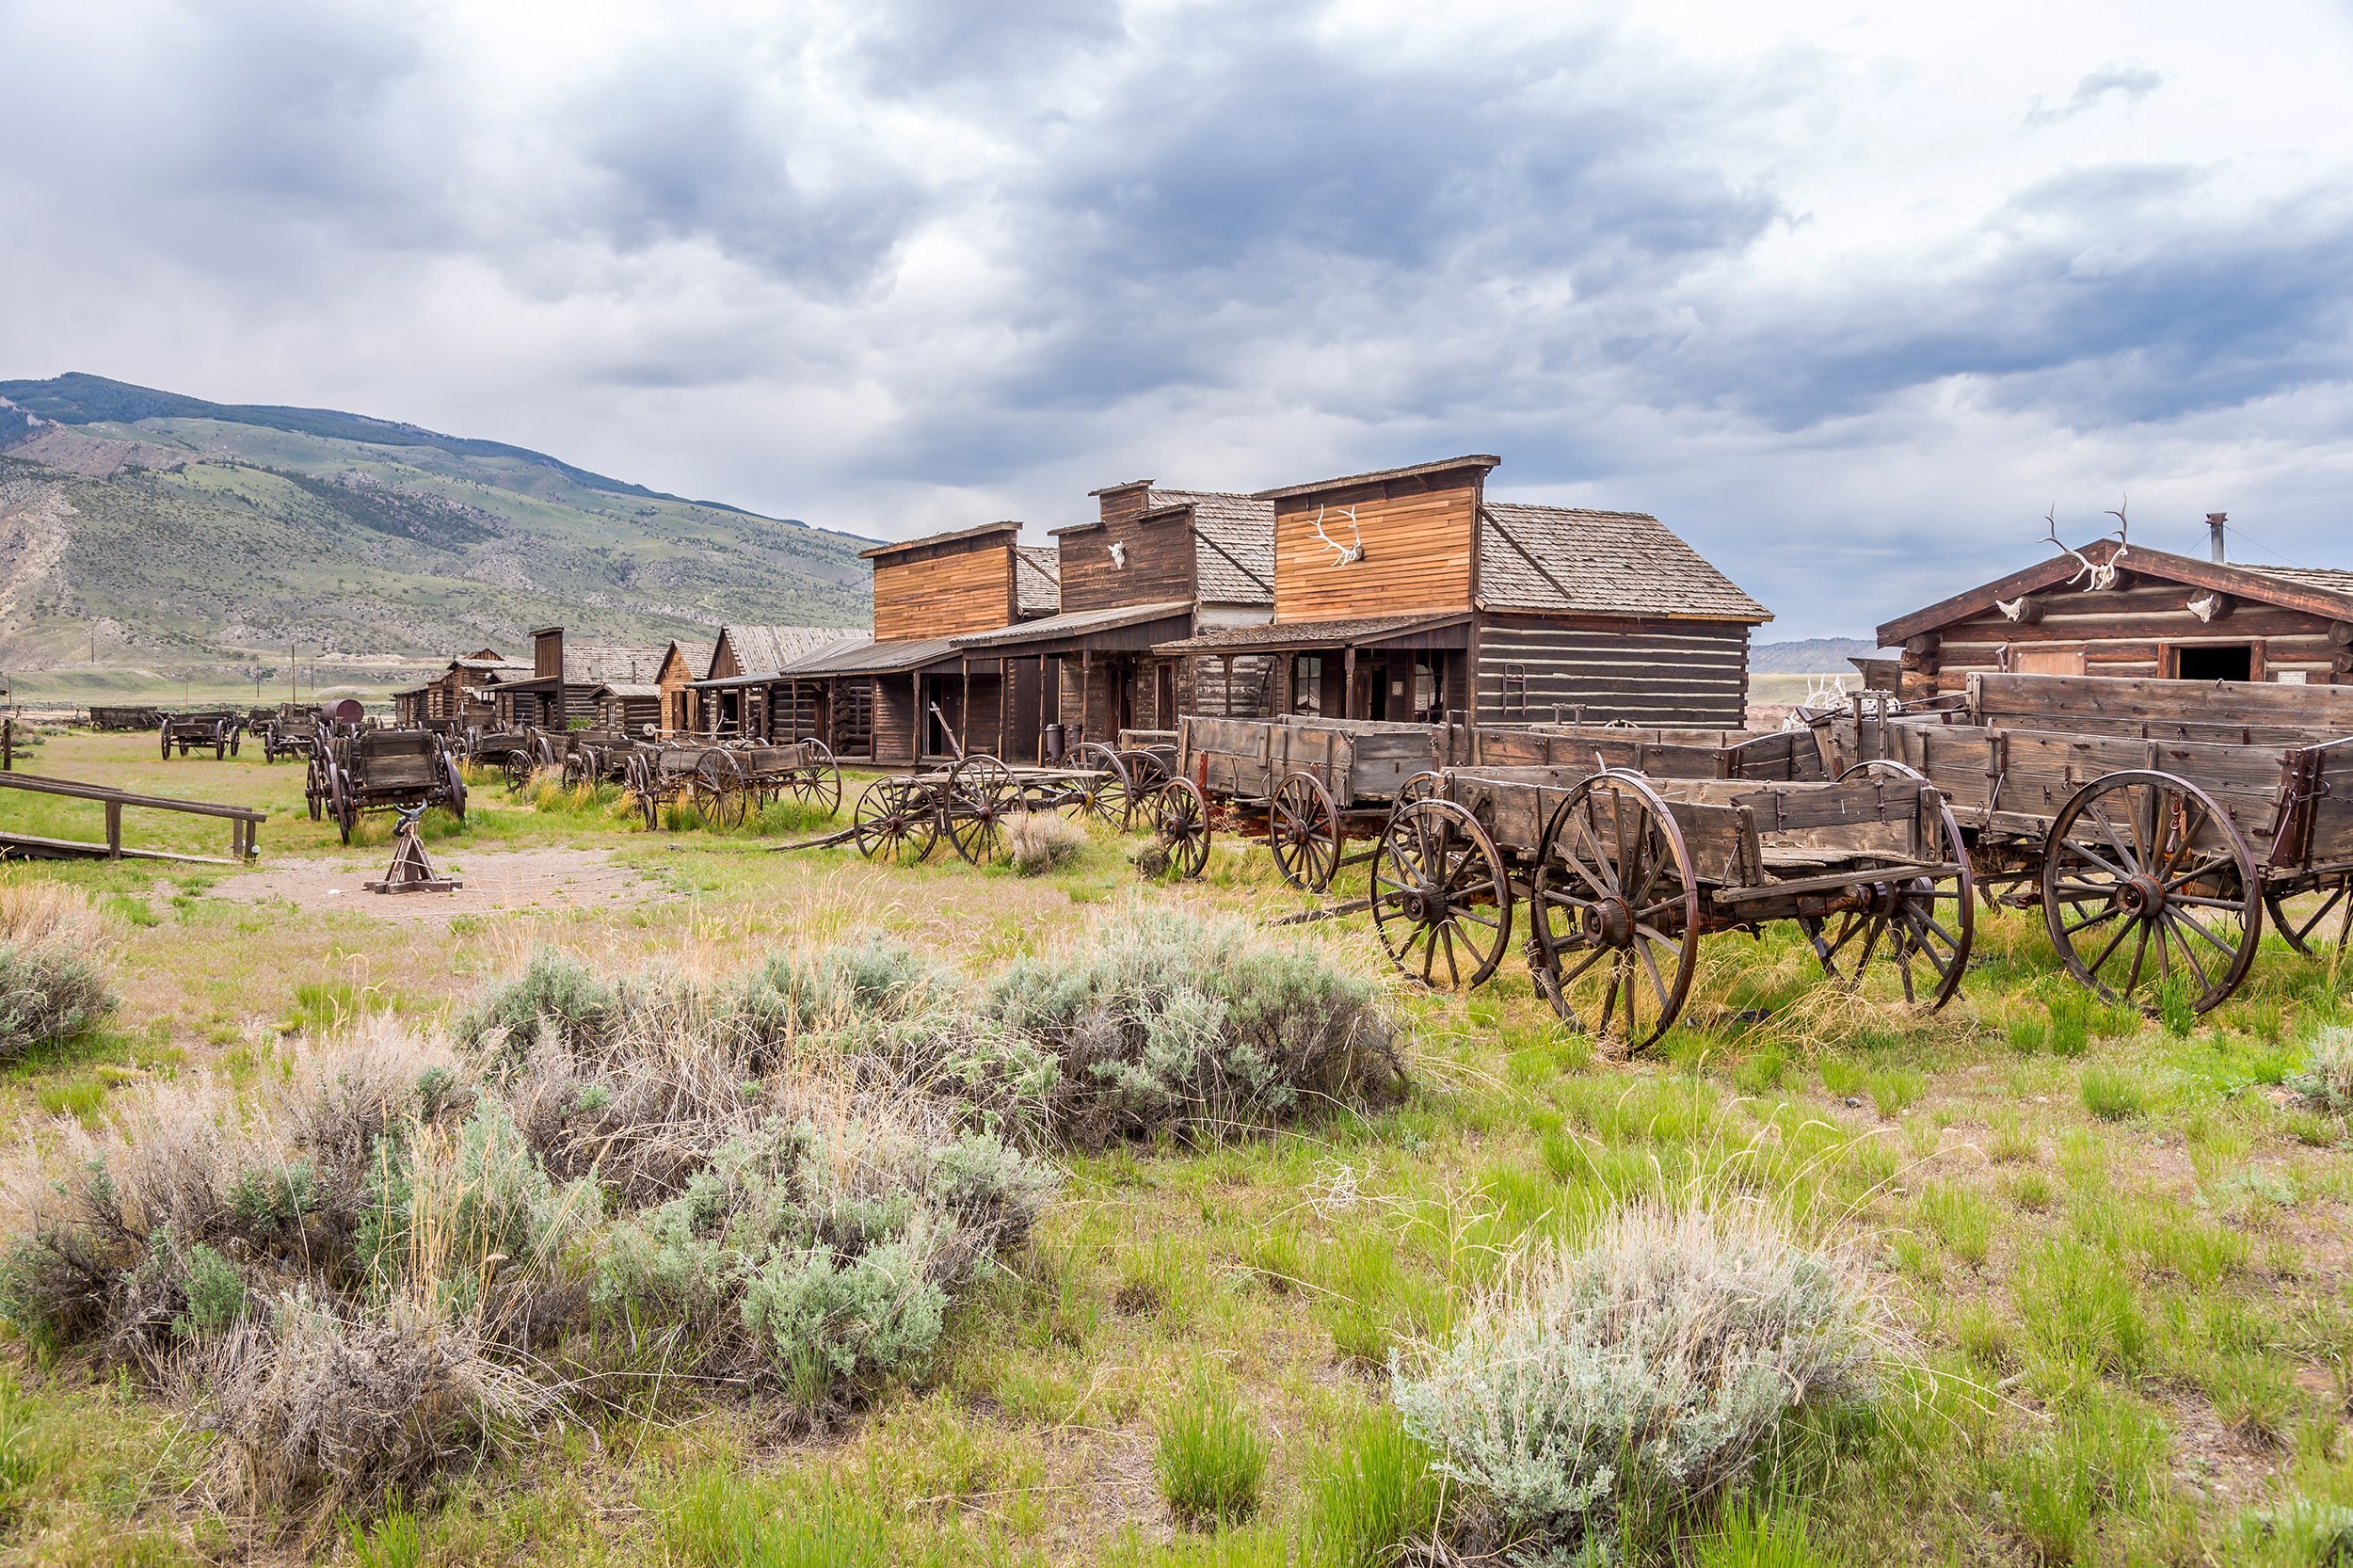 <p><strong>Location:</strong> Cody, Wyoming <br><strong>Era:</strong> Late 1800s <br><strong>What to do:</strong> Just outside Yellowstone National Park, explore <a href="https://beckley.org/coal-mine/">restored frontier-town buildings</a>, including a general store, school, post office, blacksmith shop, and saloon. Also check out the gravesites of prominent frontiersmen. <br><strong>Cost:</strong> $10 for ages 13 and up; $9 for seniors over 65; $5 for kids ages 6 to 12</p>